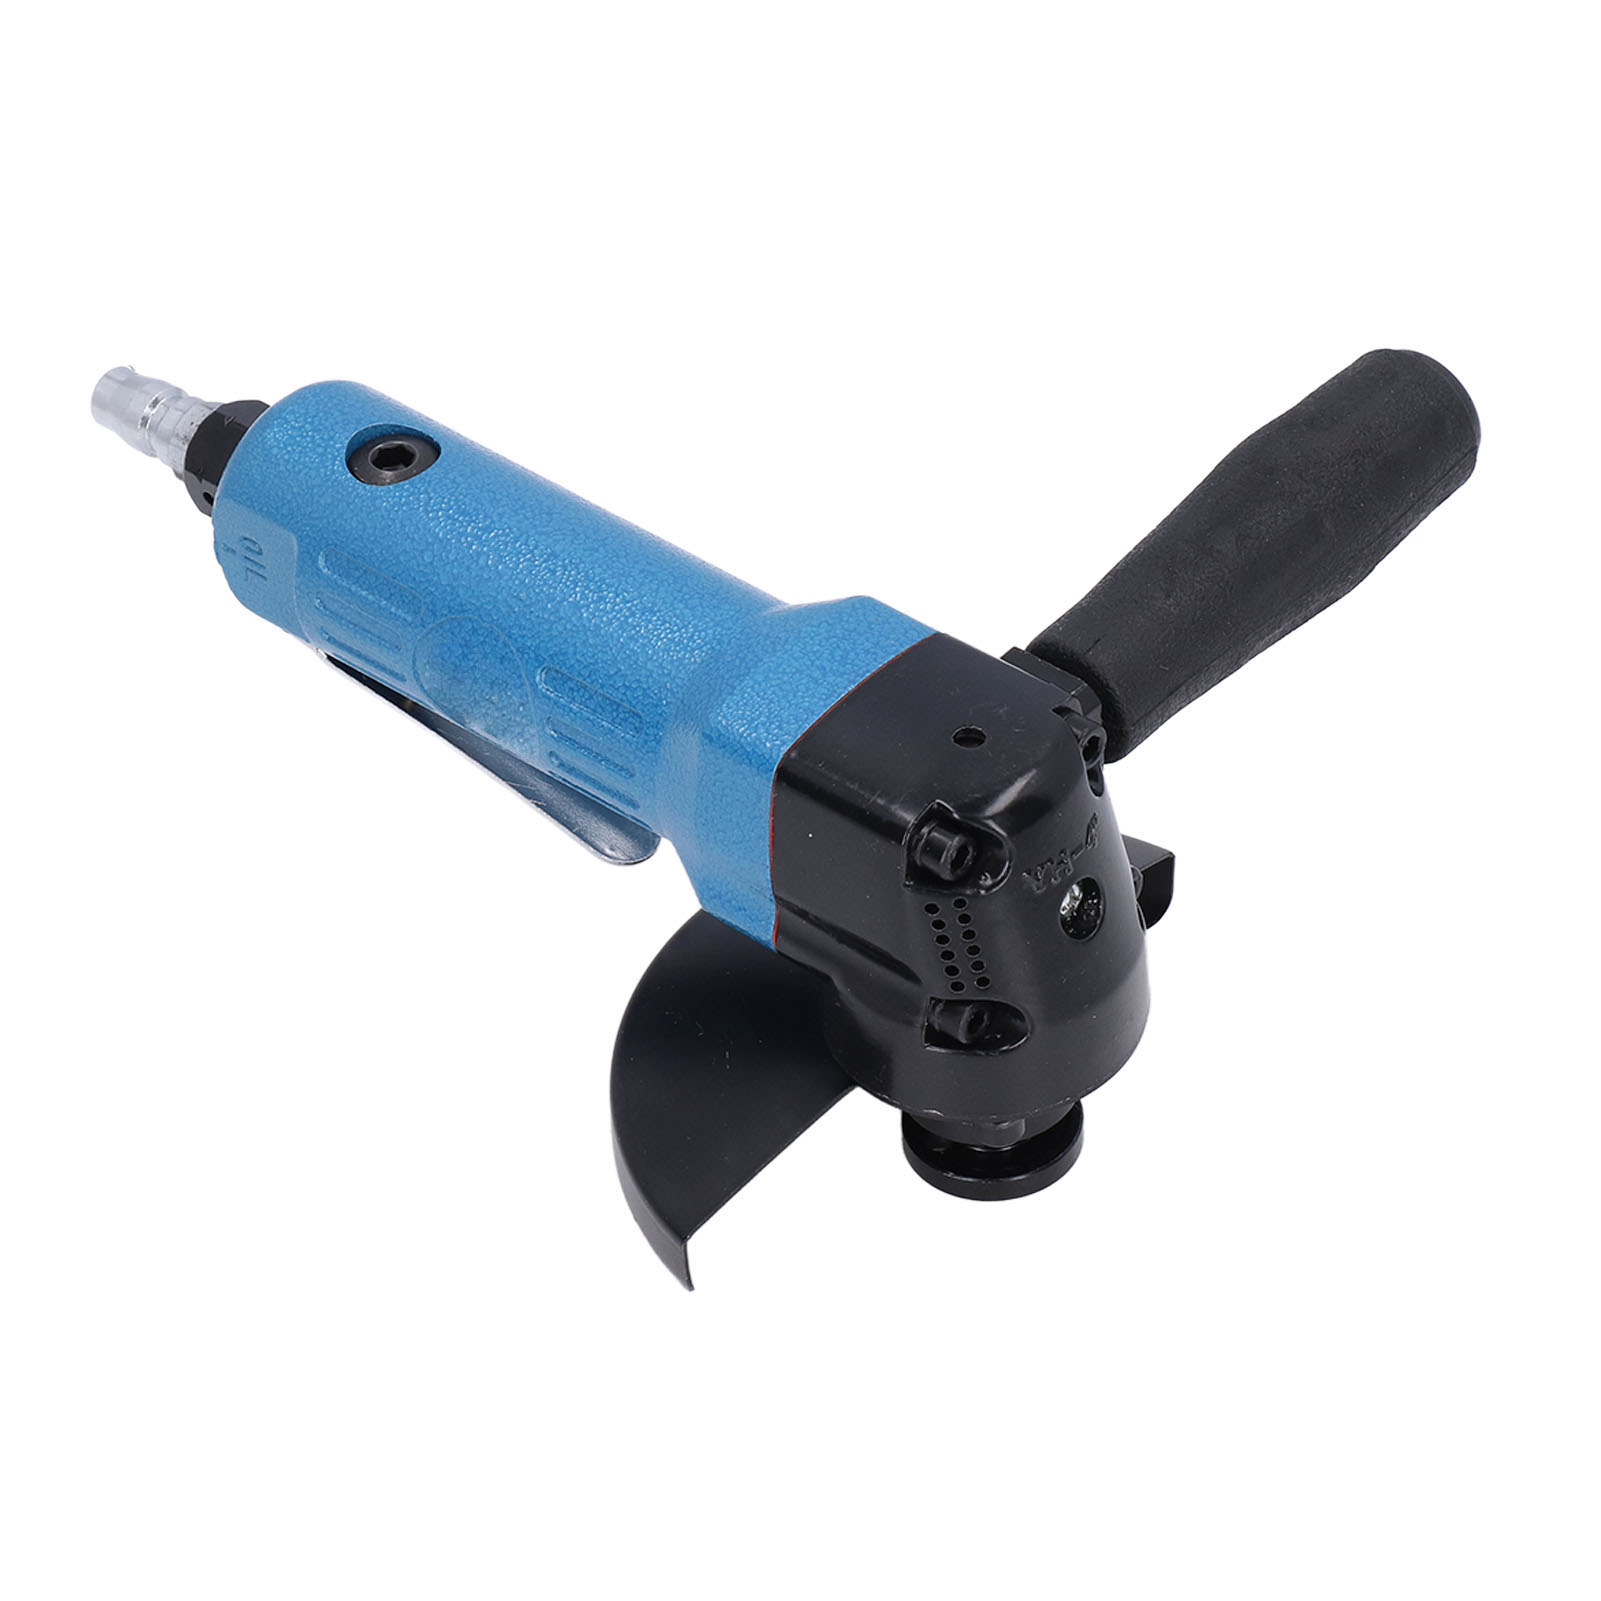 Air Grinder Inch Grinder Air Angle Grinder Angle Grinder 4in Pneumatic  Lightweight 11000rpm Powerful Aluminium Alloy Air Grinder For Cutting Grind 